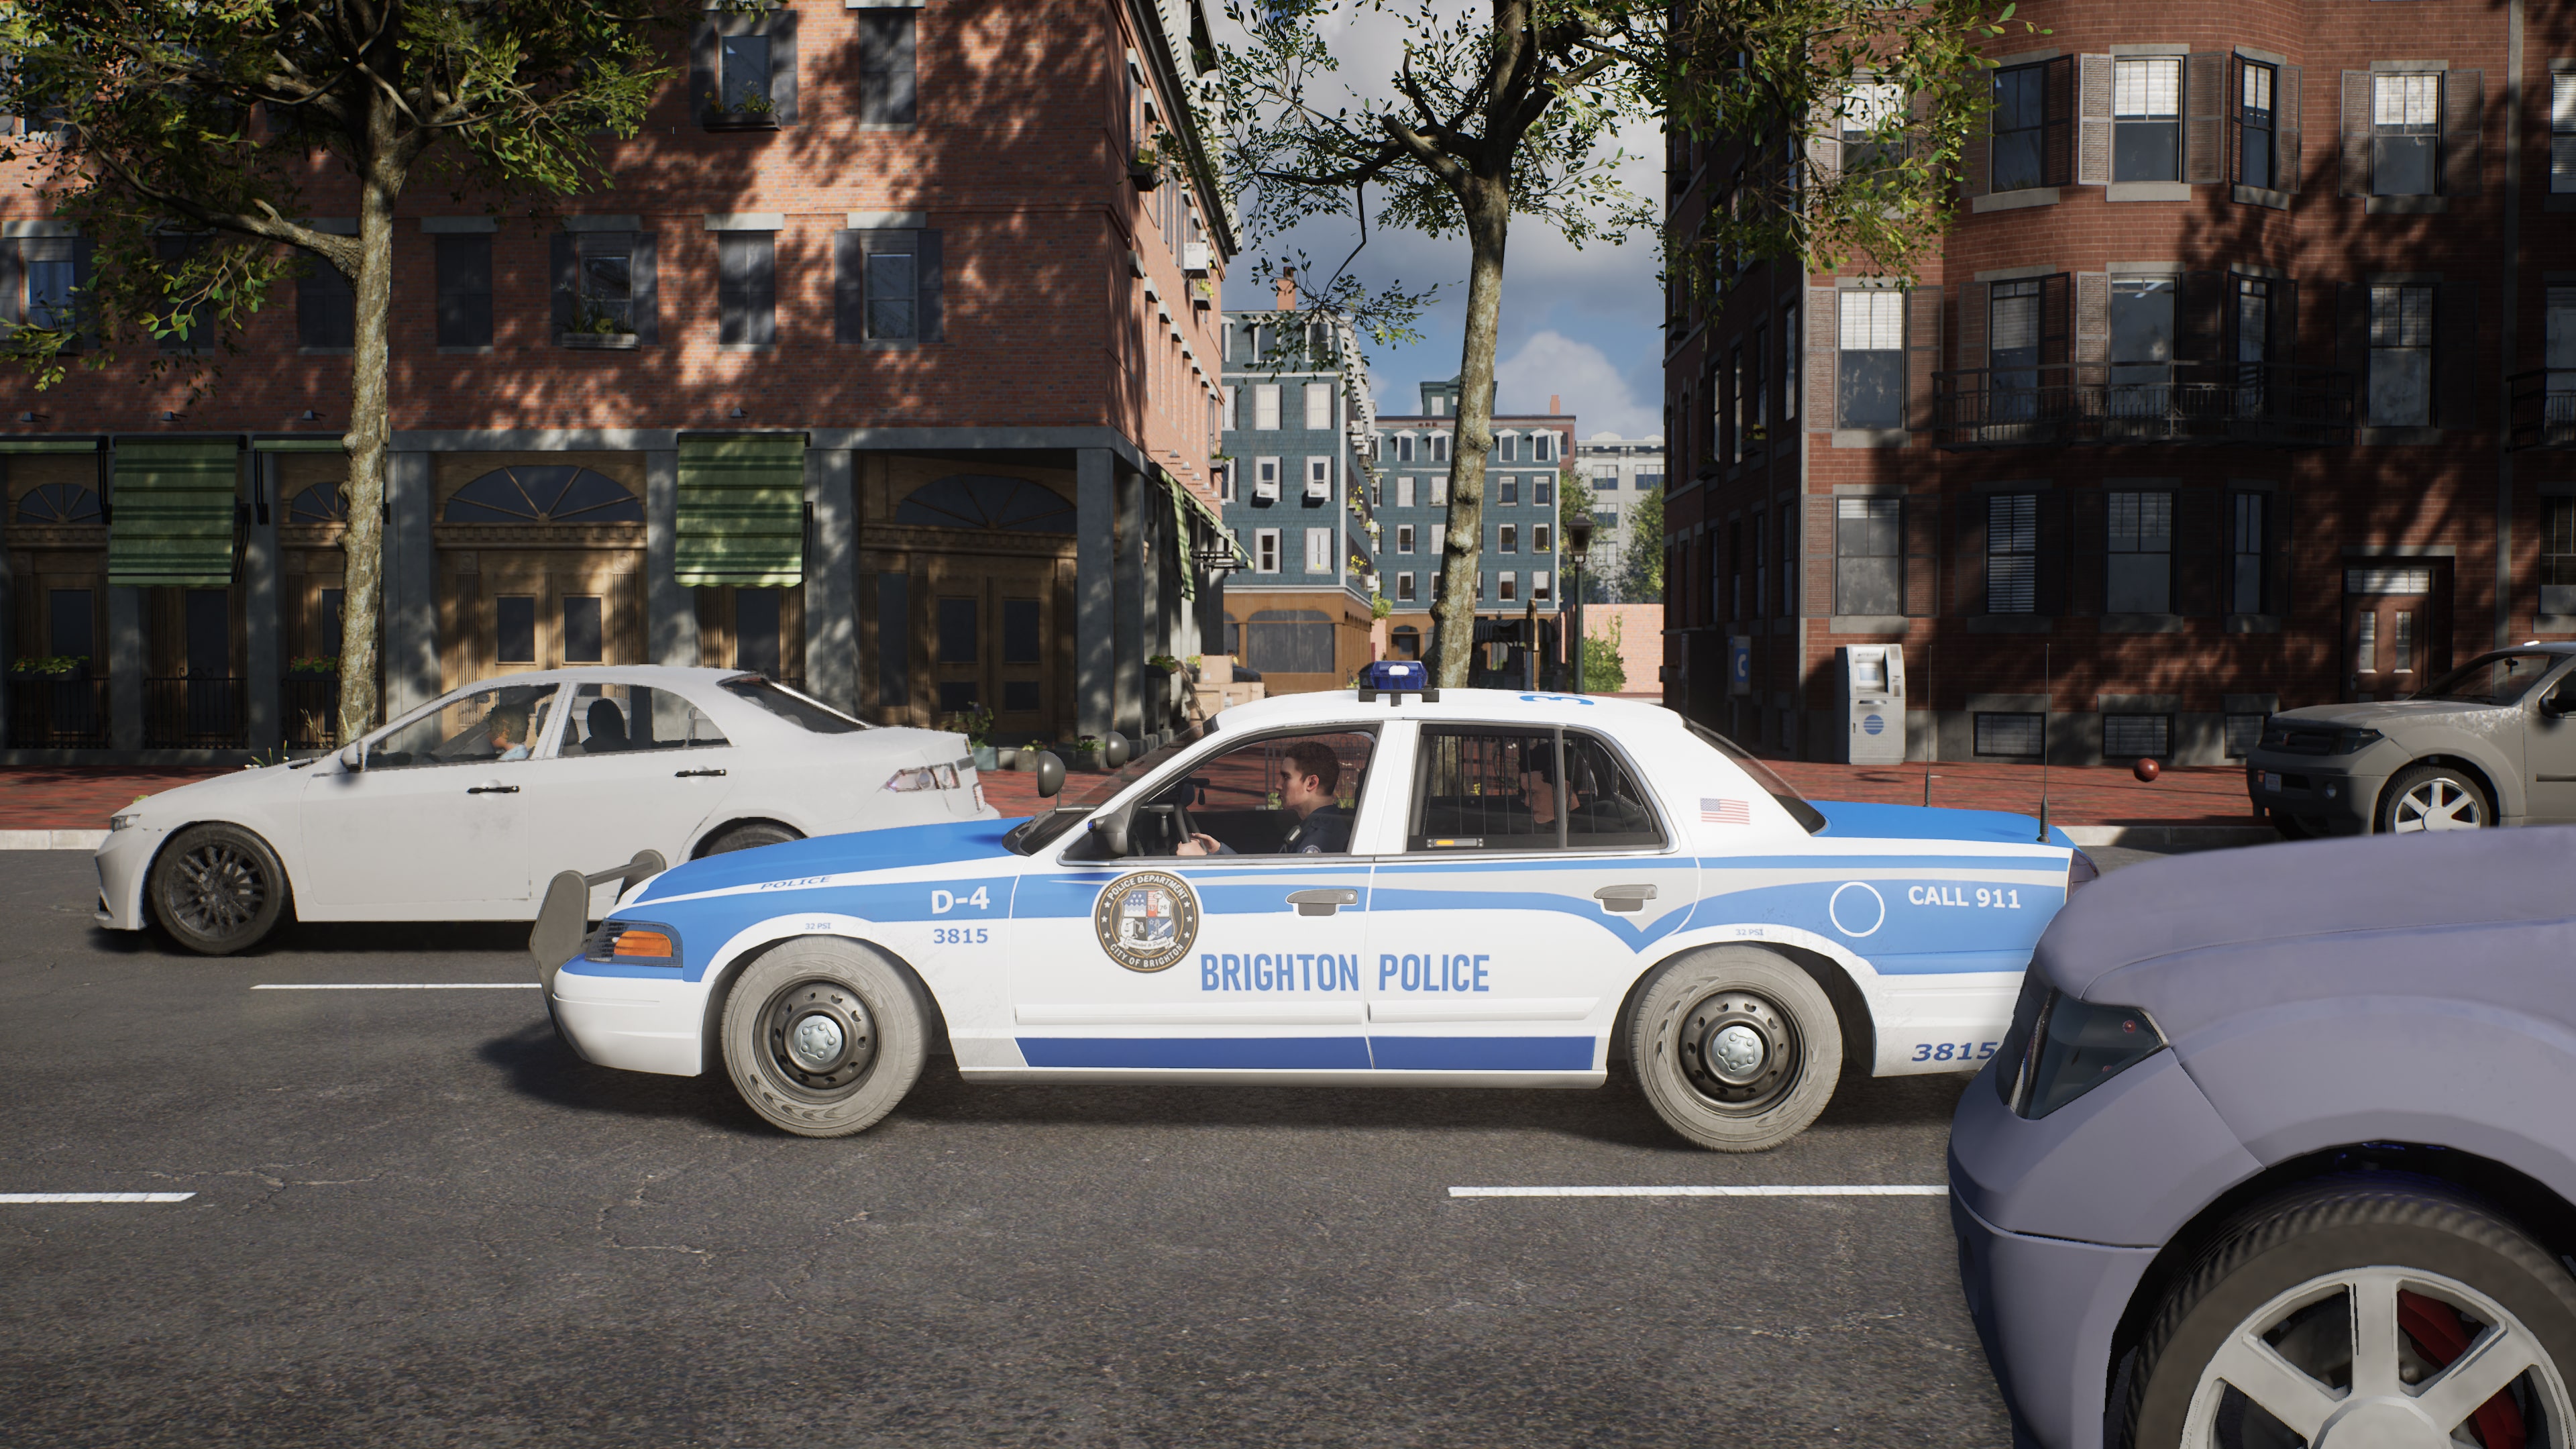 DLC Police : Police Vehicle Officers Compact Simulator: Patrol